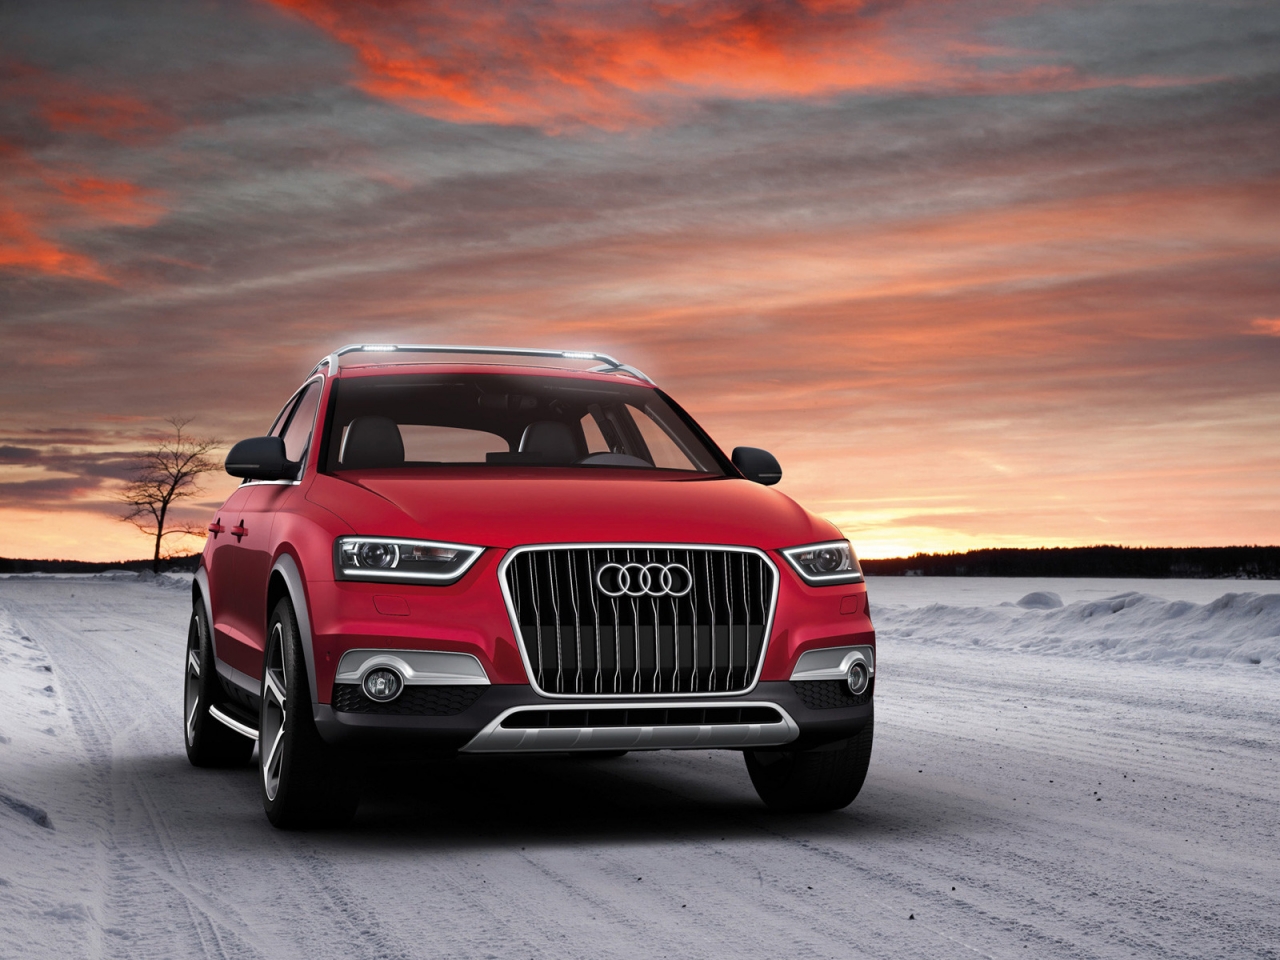 2012 Audi Q3 Vail Front for 1280 x 960 resolution